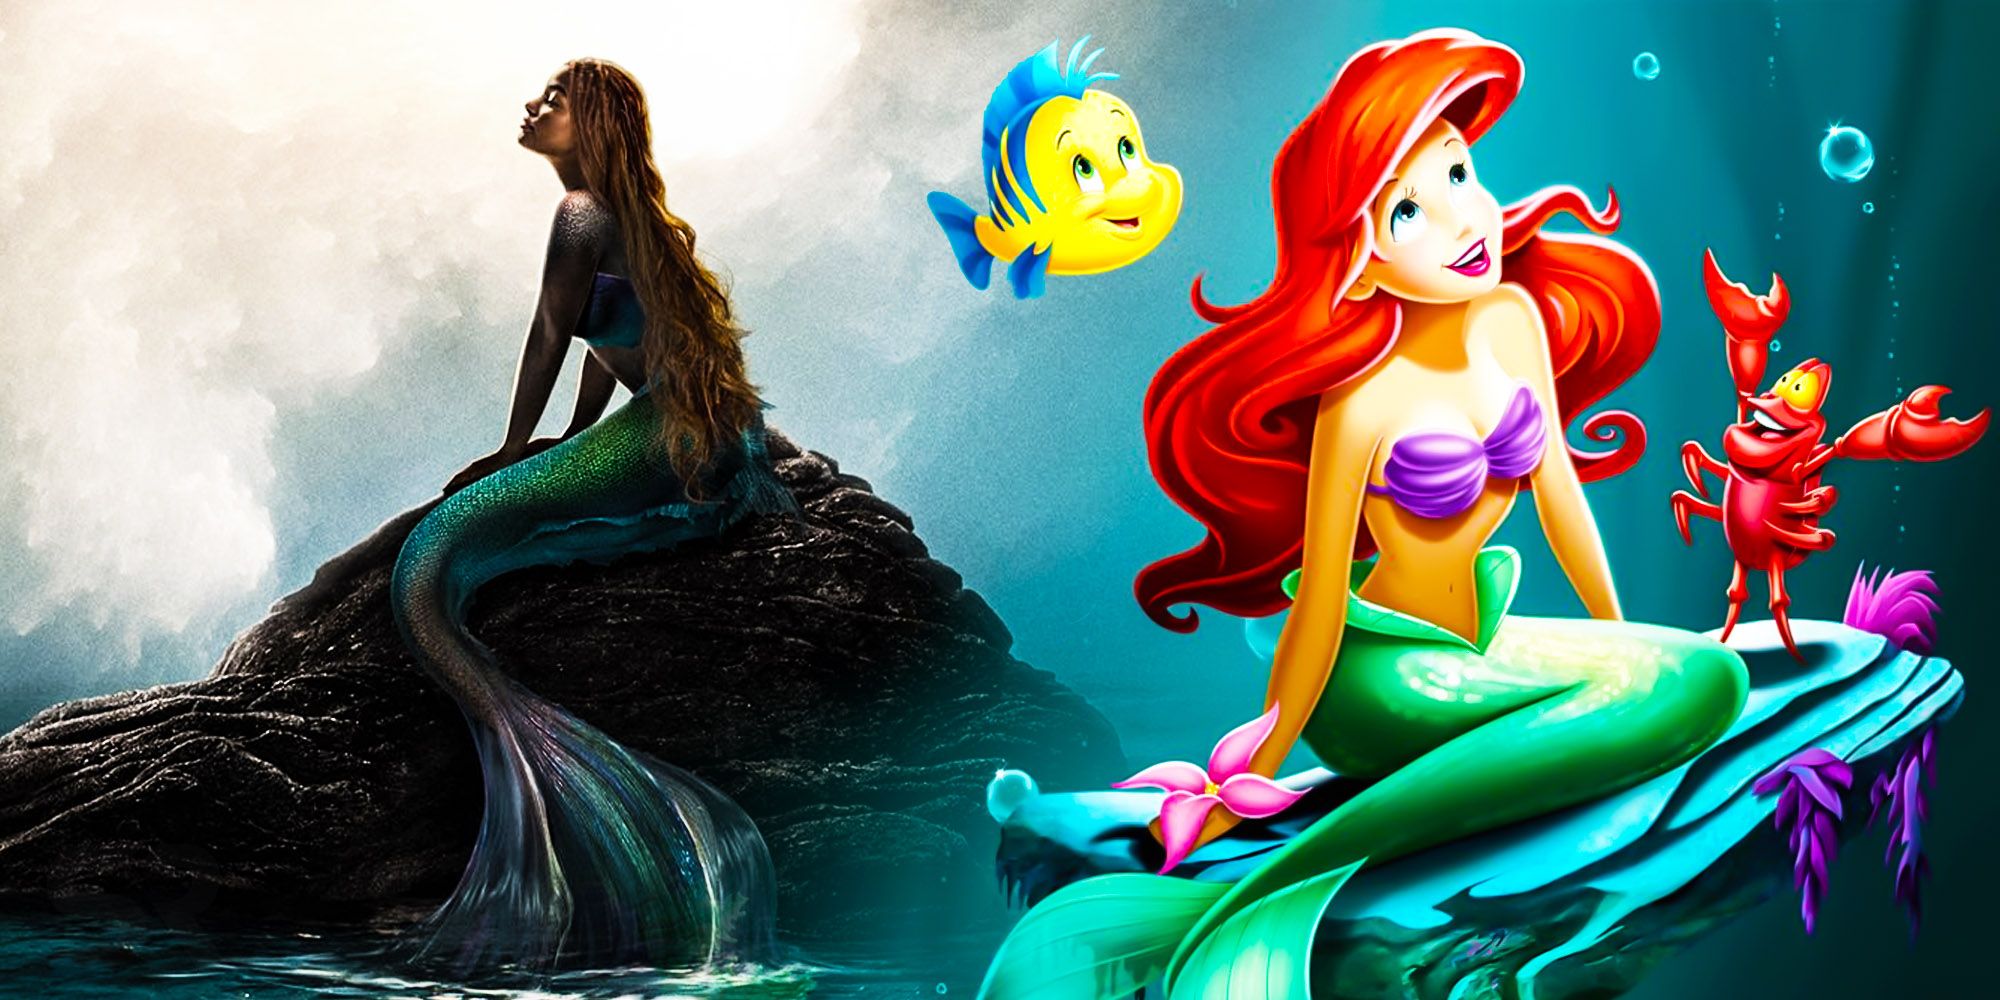 The Little Mermaid Trailer Still Hasn't Fixed The Biggest Remake